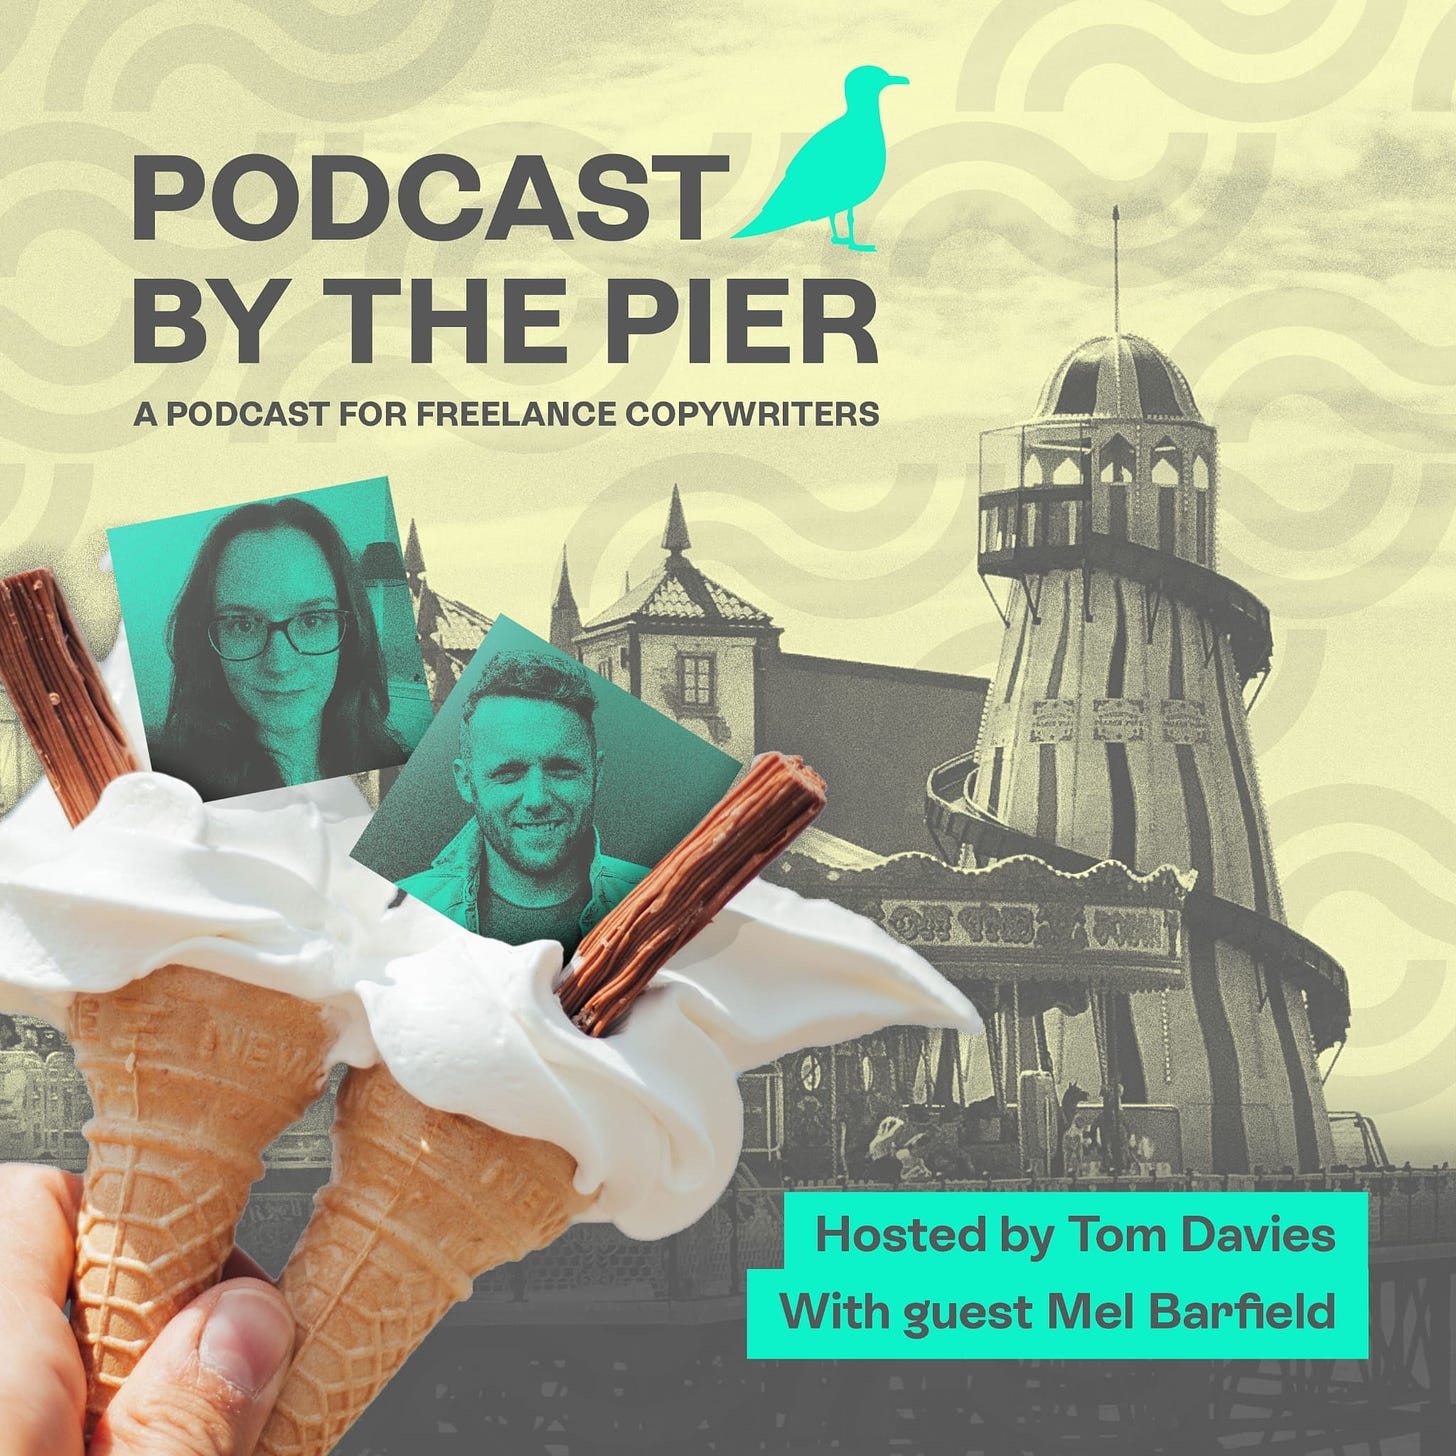 Podcast by the pier graphic showing a helter skelter and two ice creams